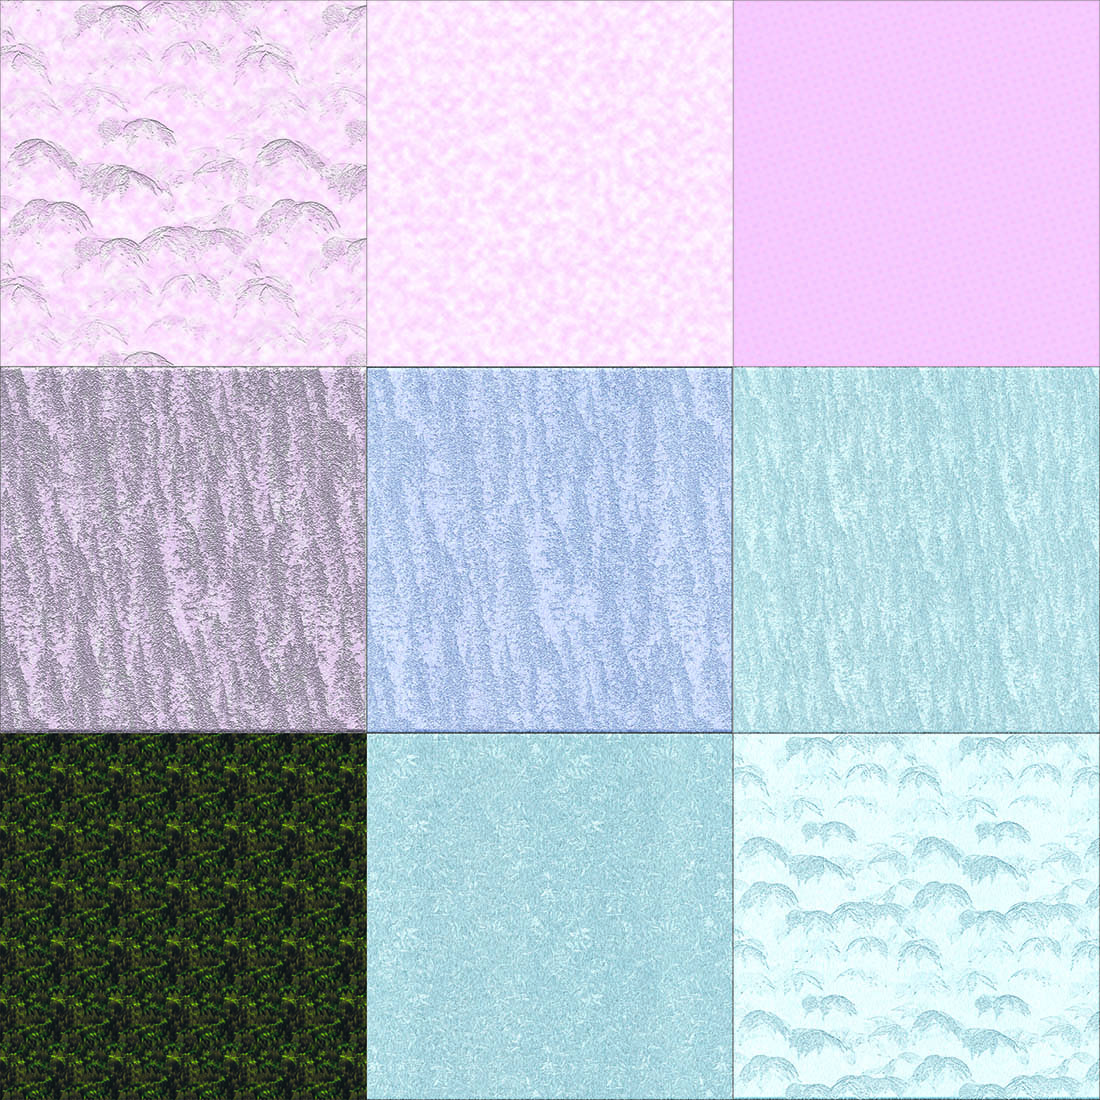 The wallpaper is texture design 9 cdr file preview image.